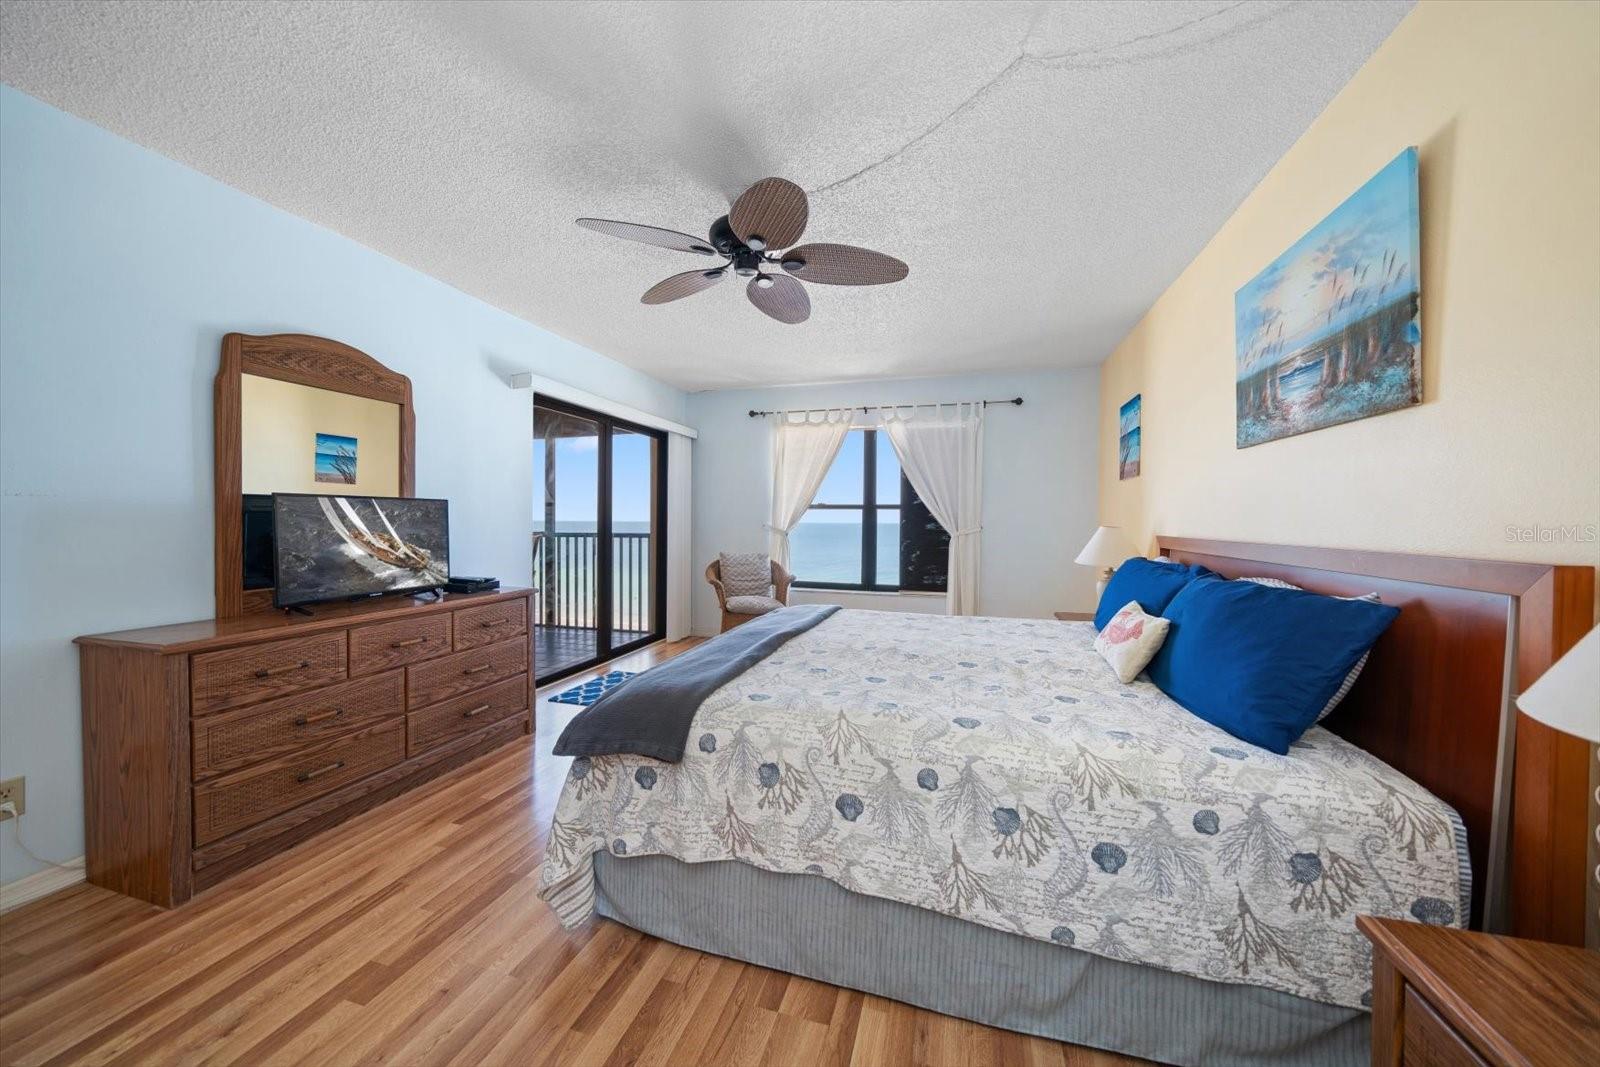 Master Bedroom has view of the ocean and you can hear the sounds of waves as you fall asleep.